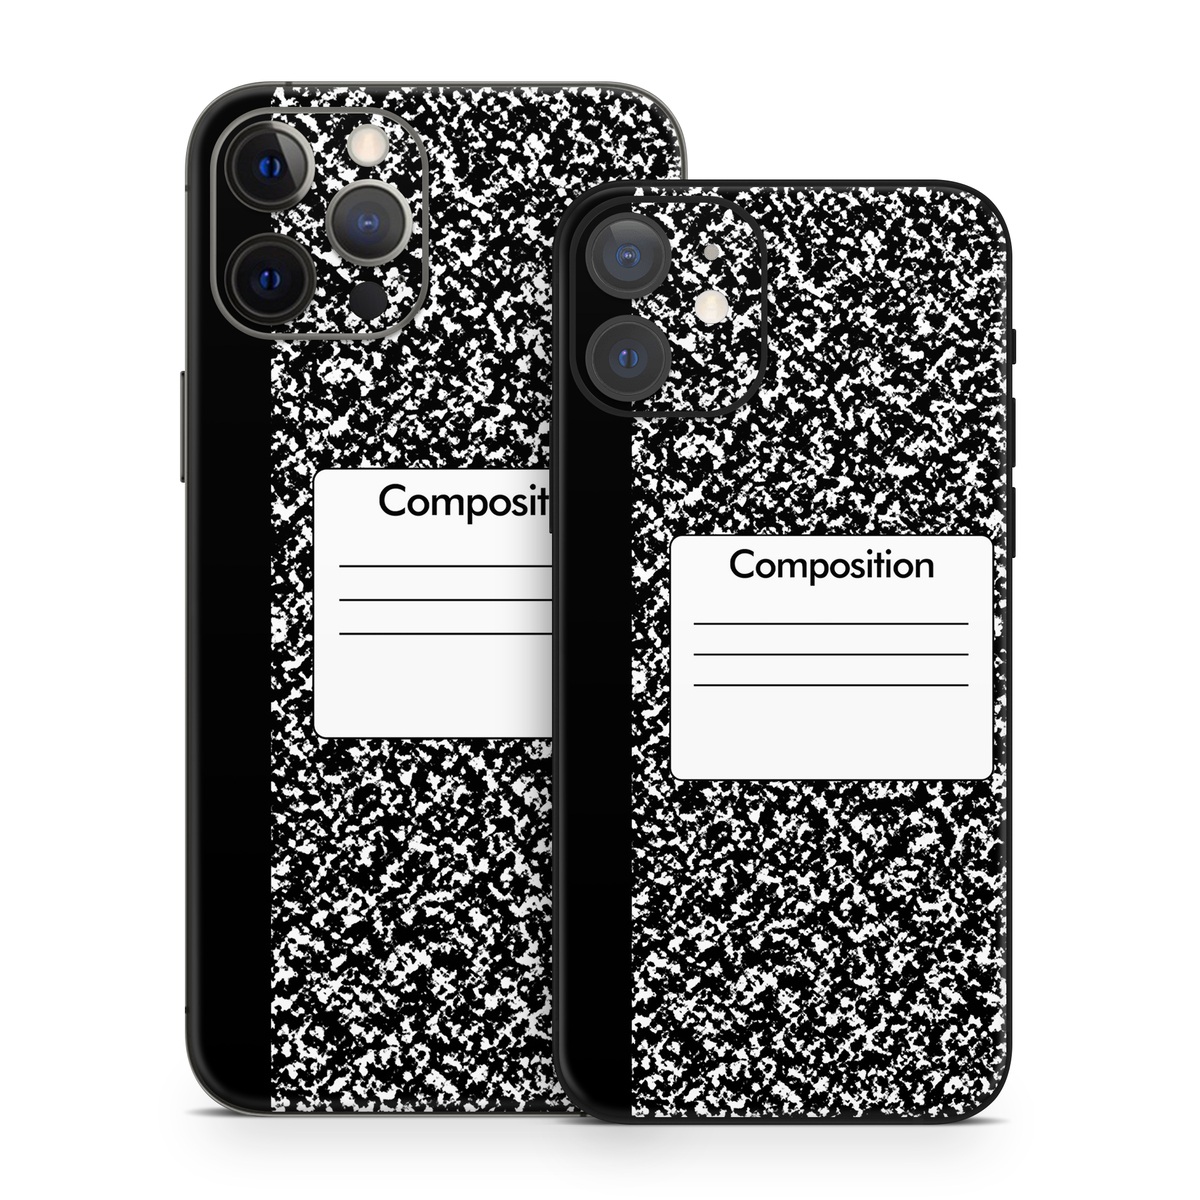 iPhone 12 Skin design of Text, Font, Line, Pattern, Black-and-white, Illustration with black, gray, white colors